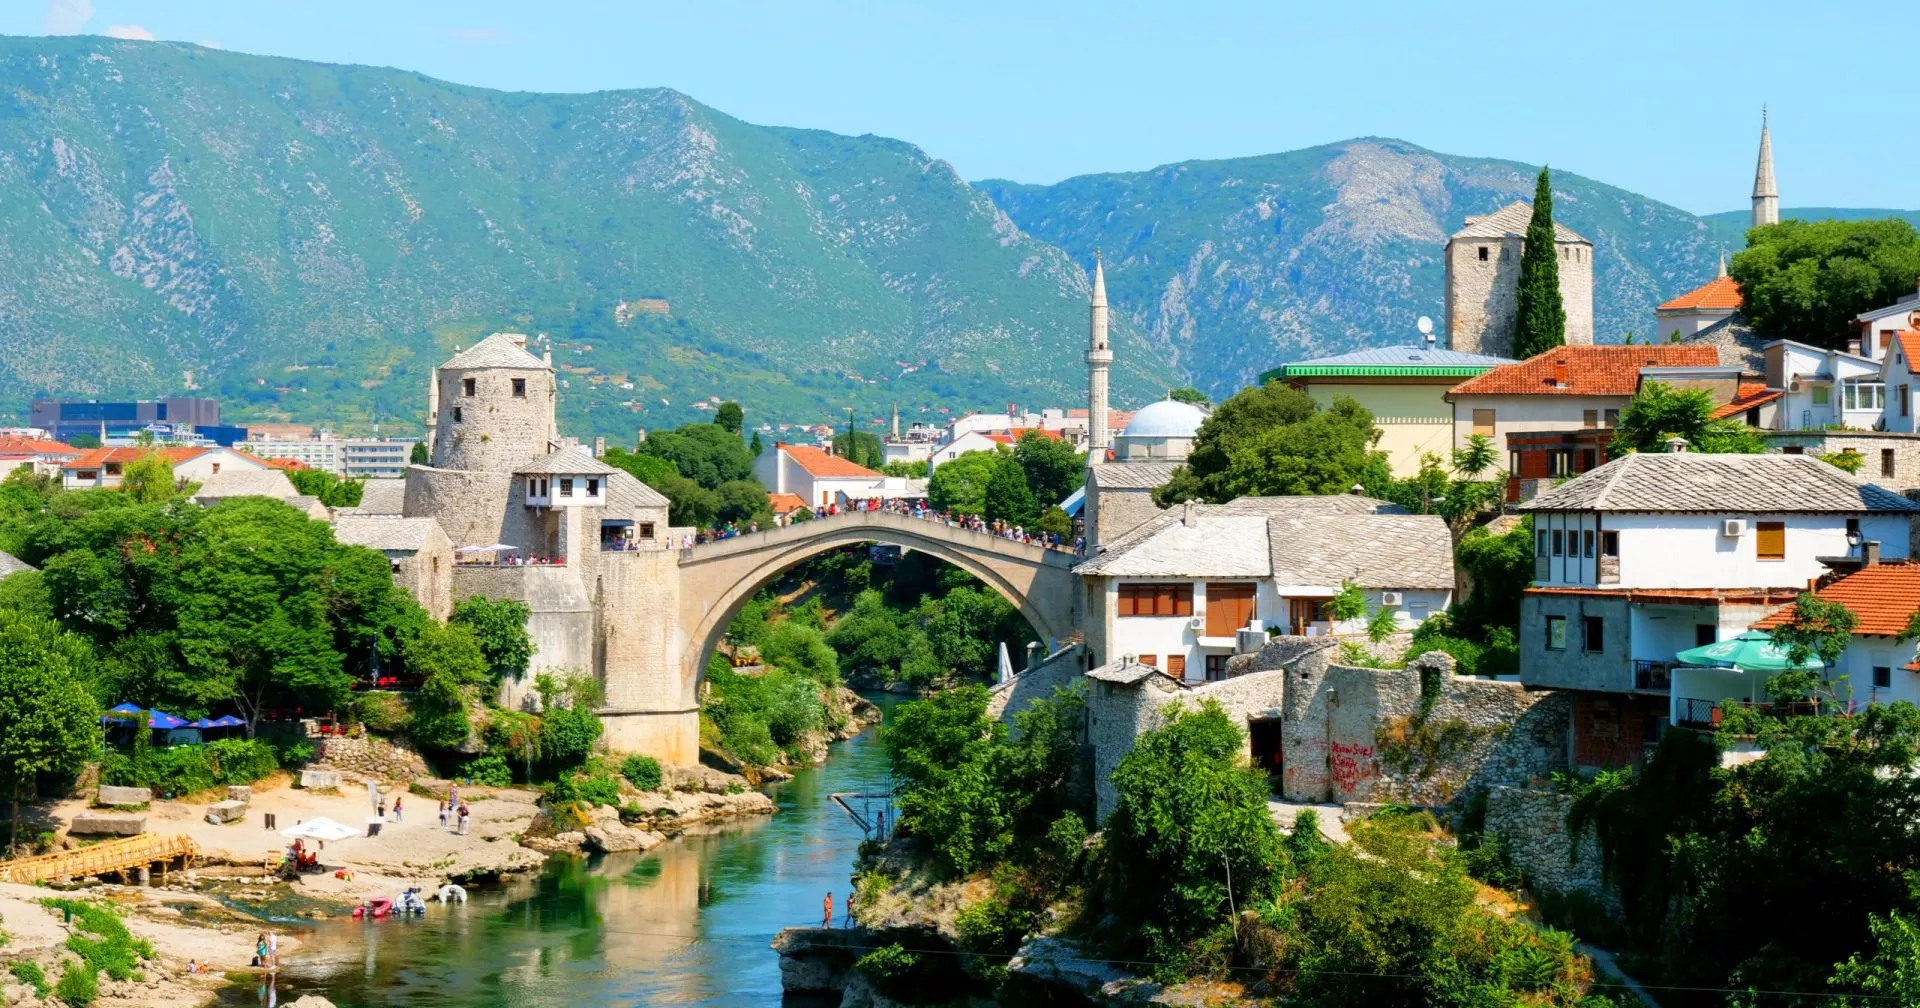 Bosnia and Herzegovina, Mostar with mosque and turquoise river